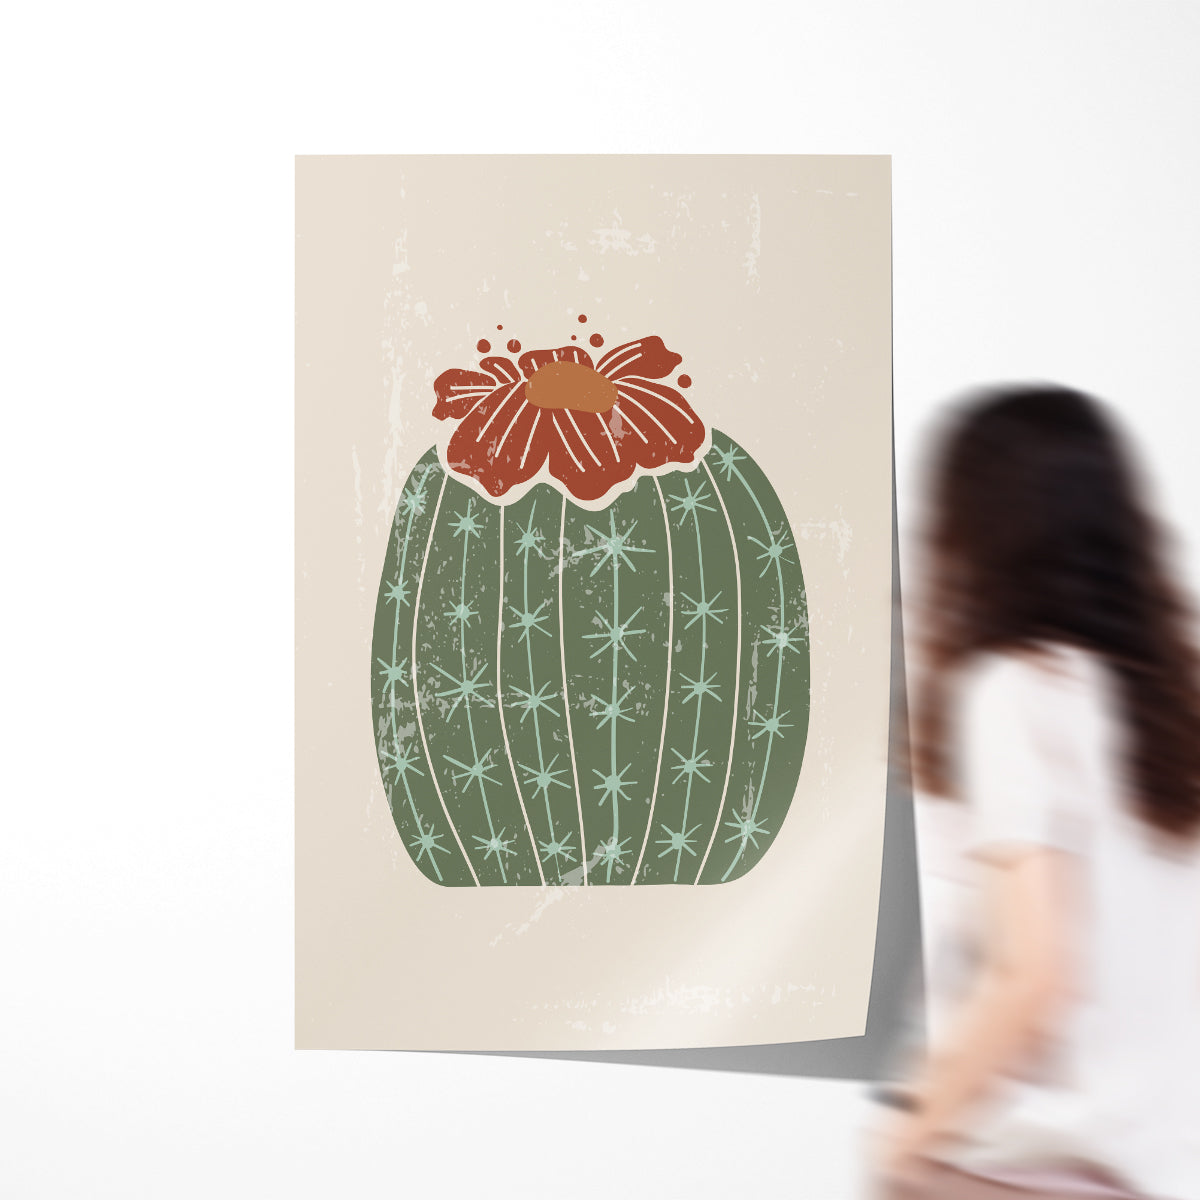 Cactus Decorations For Home Poster-Vertical Posters NOT FRAMED-CetArt-8″x10″ inches-CetArt